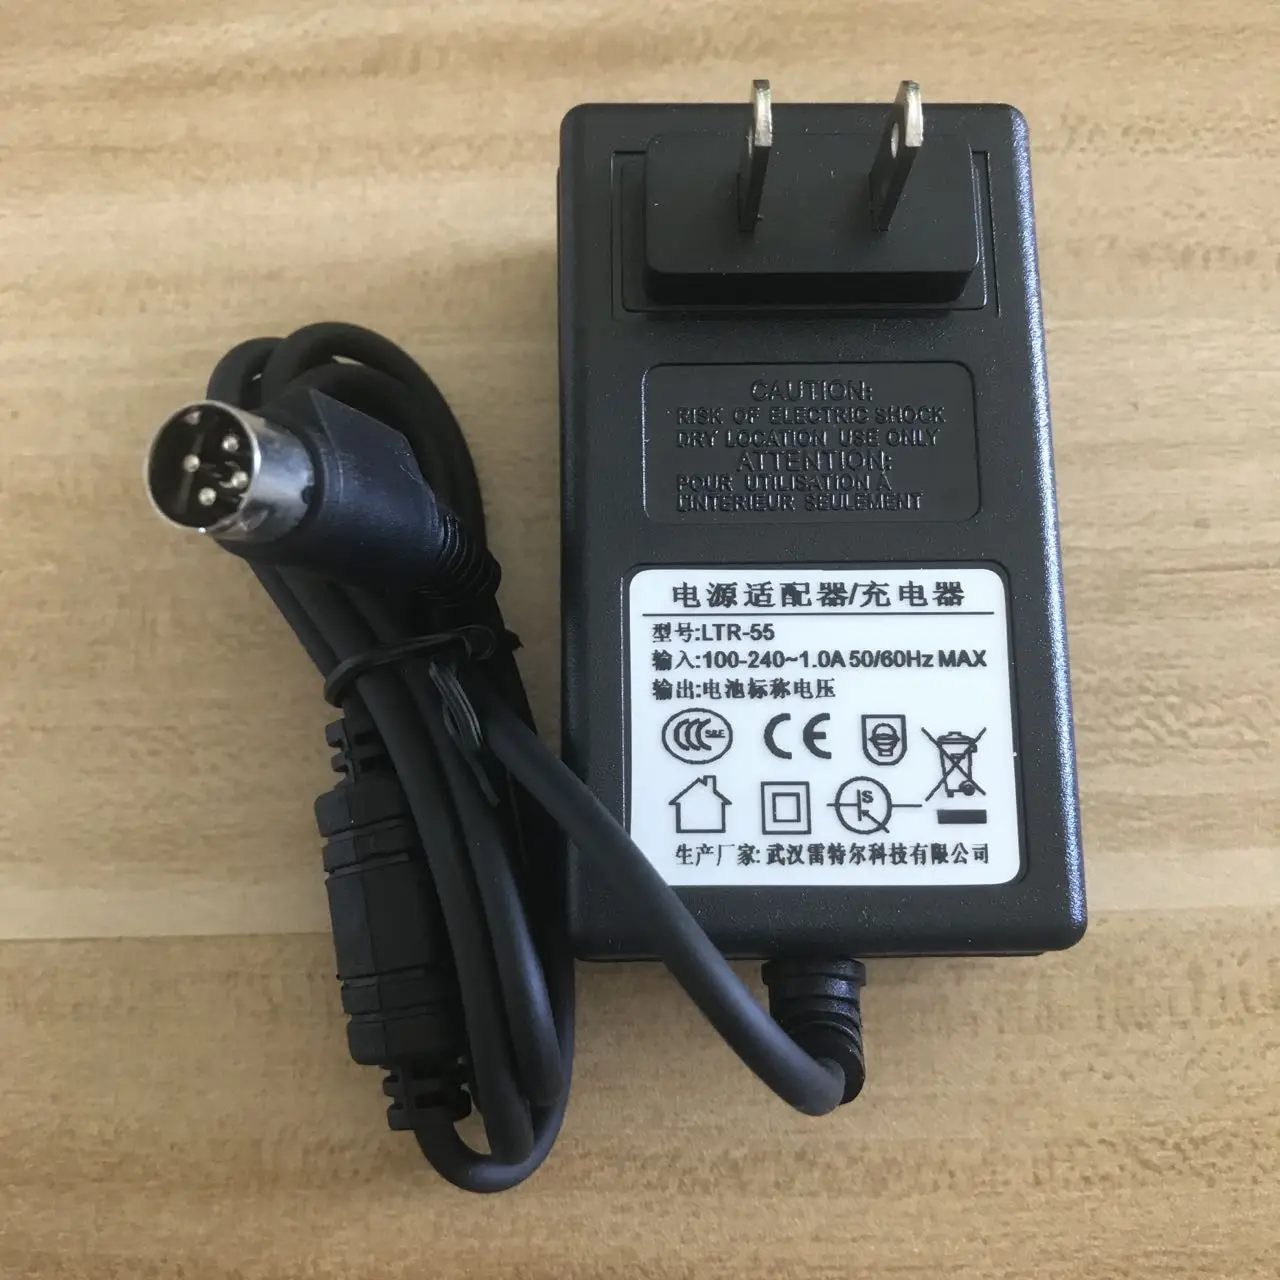 Made in China BTR-09 BTR-08 LTR-08 LTR-09 Battery Charger LTR-55 for FSM-62S 50S 60S 80S 70S 70R Fusion Splicer AC Power Adapter